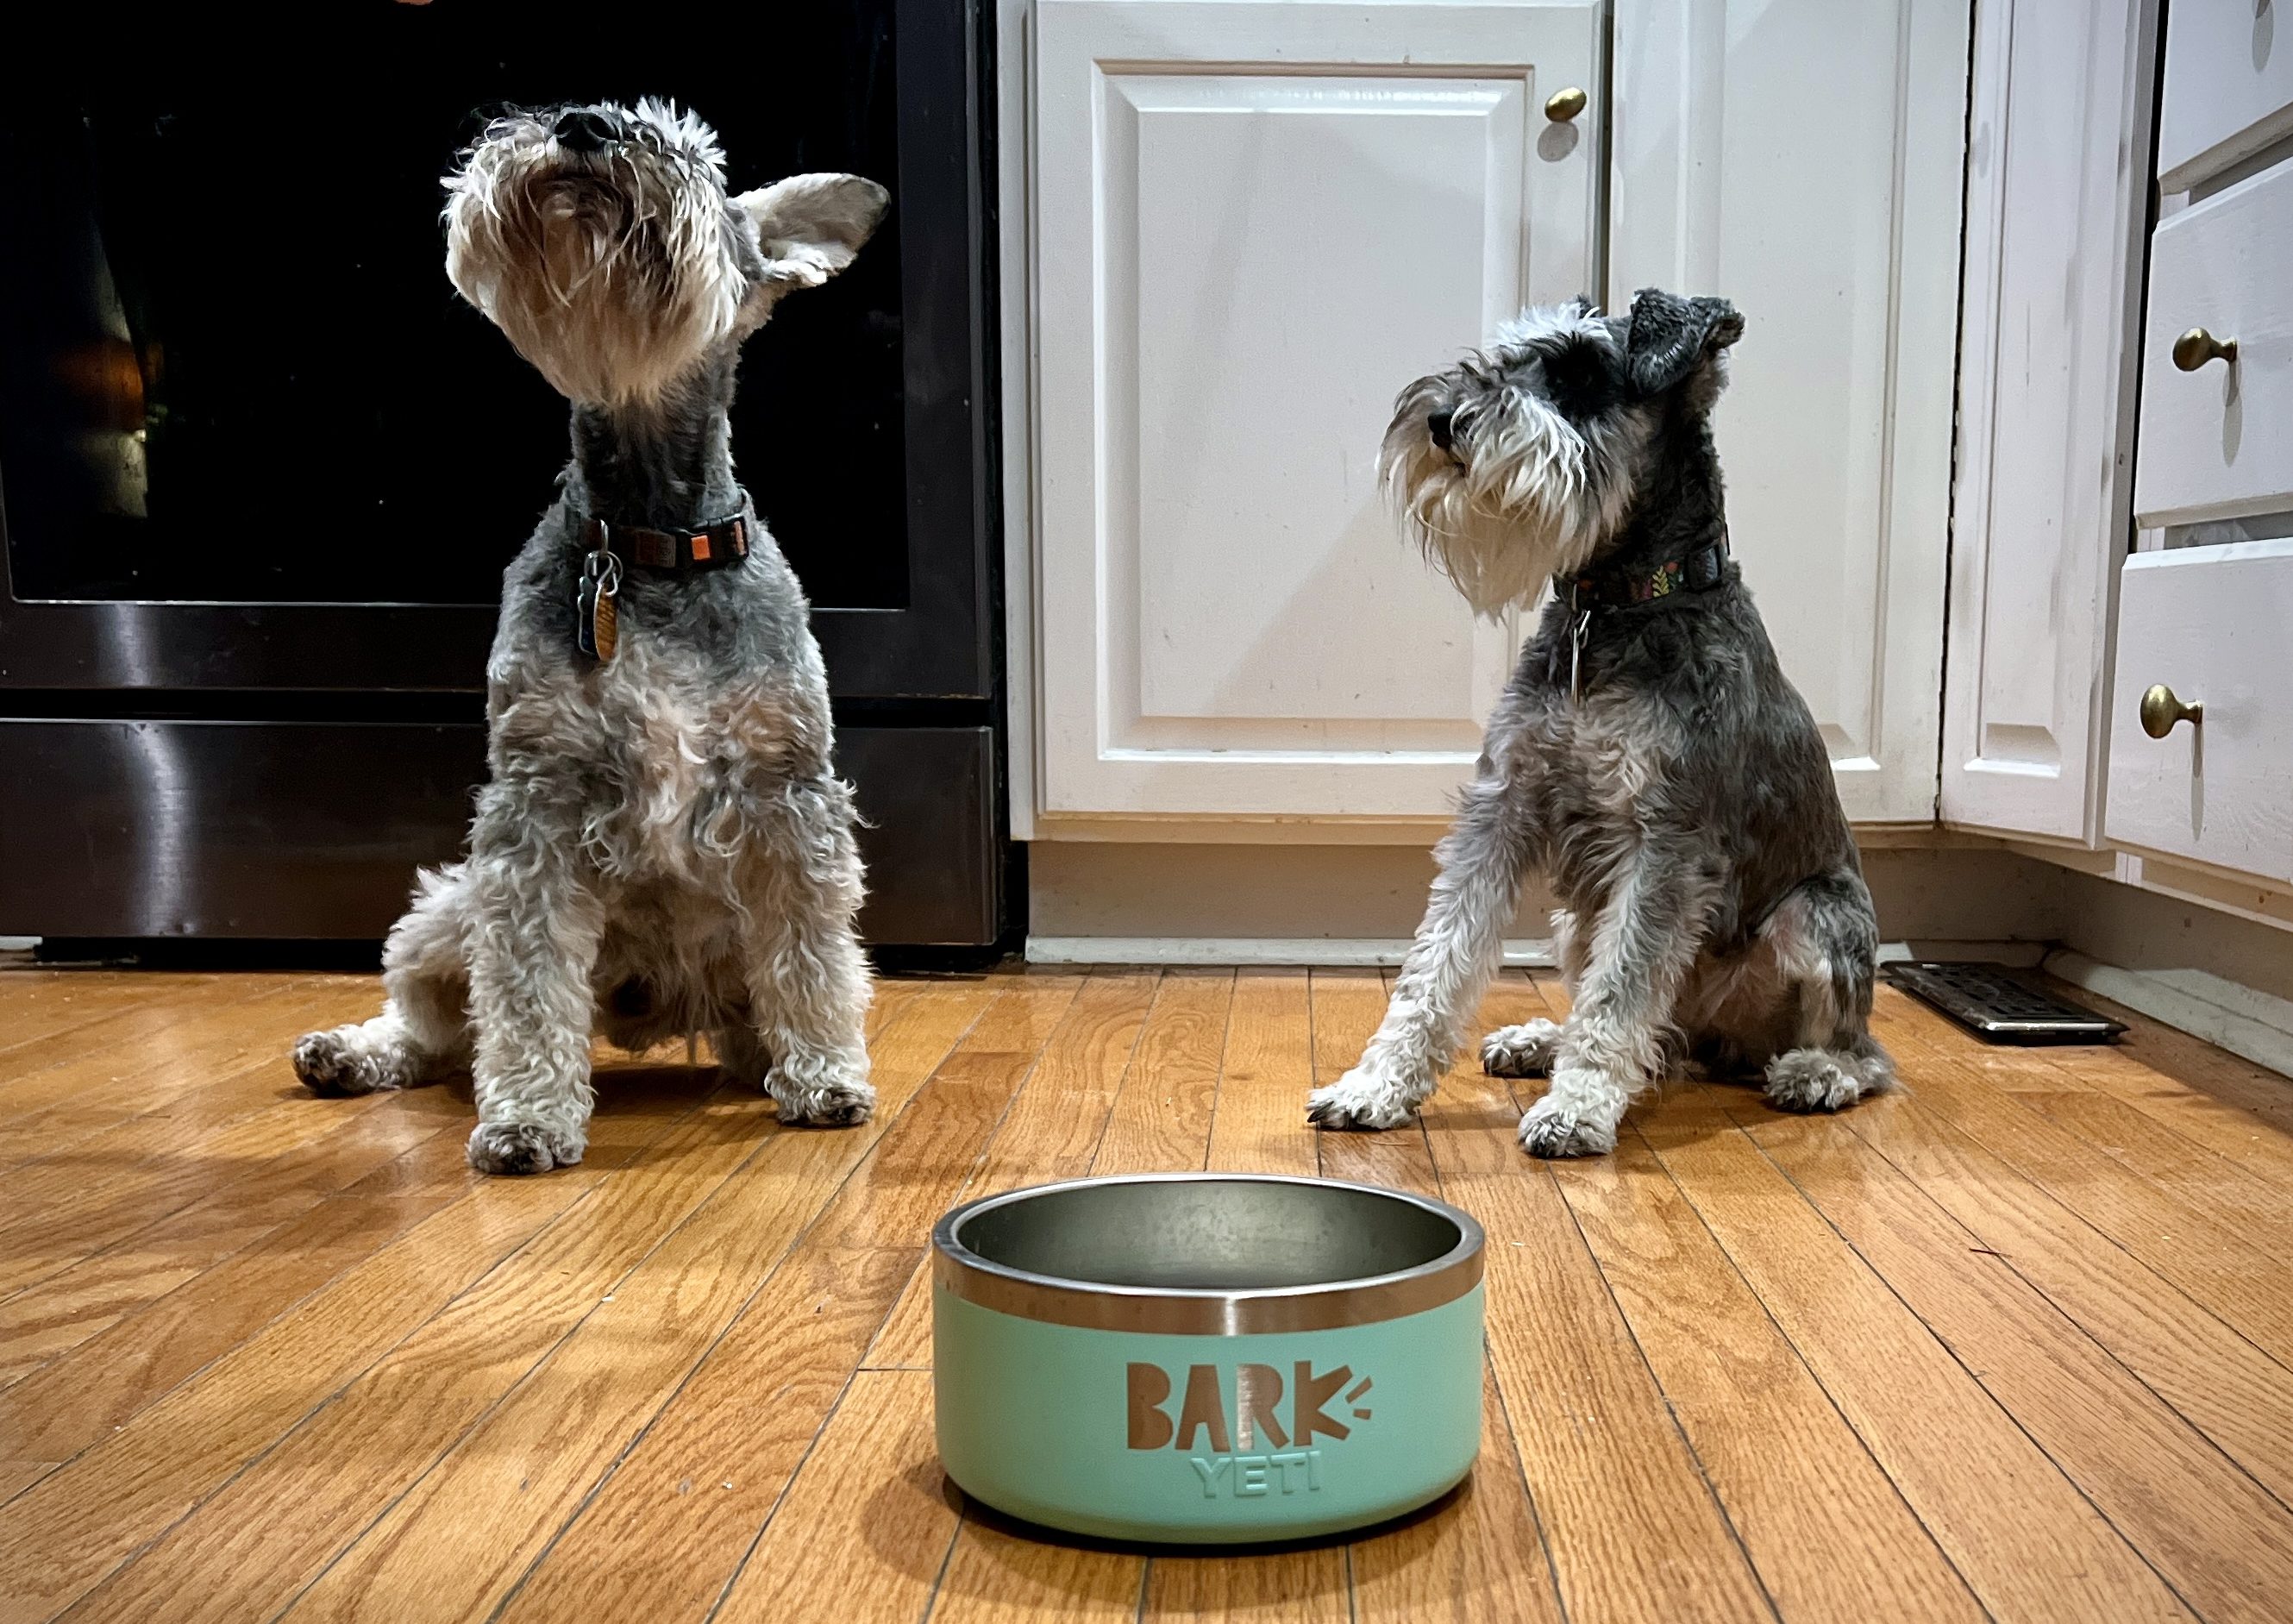 YETI Dog Bowl Review: Get It FREE With A BarkBox OR Super Chewer